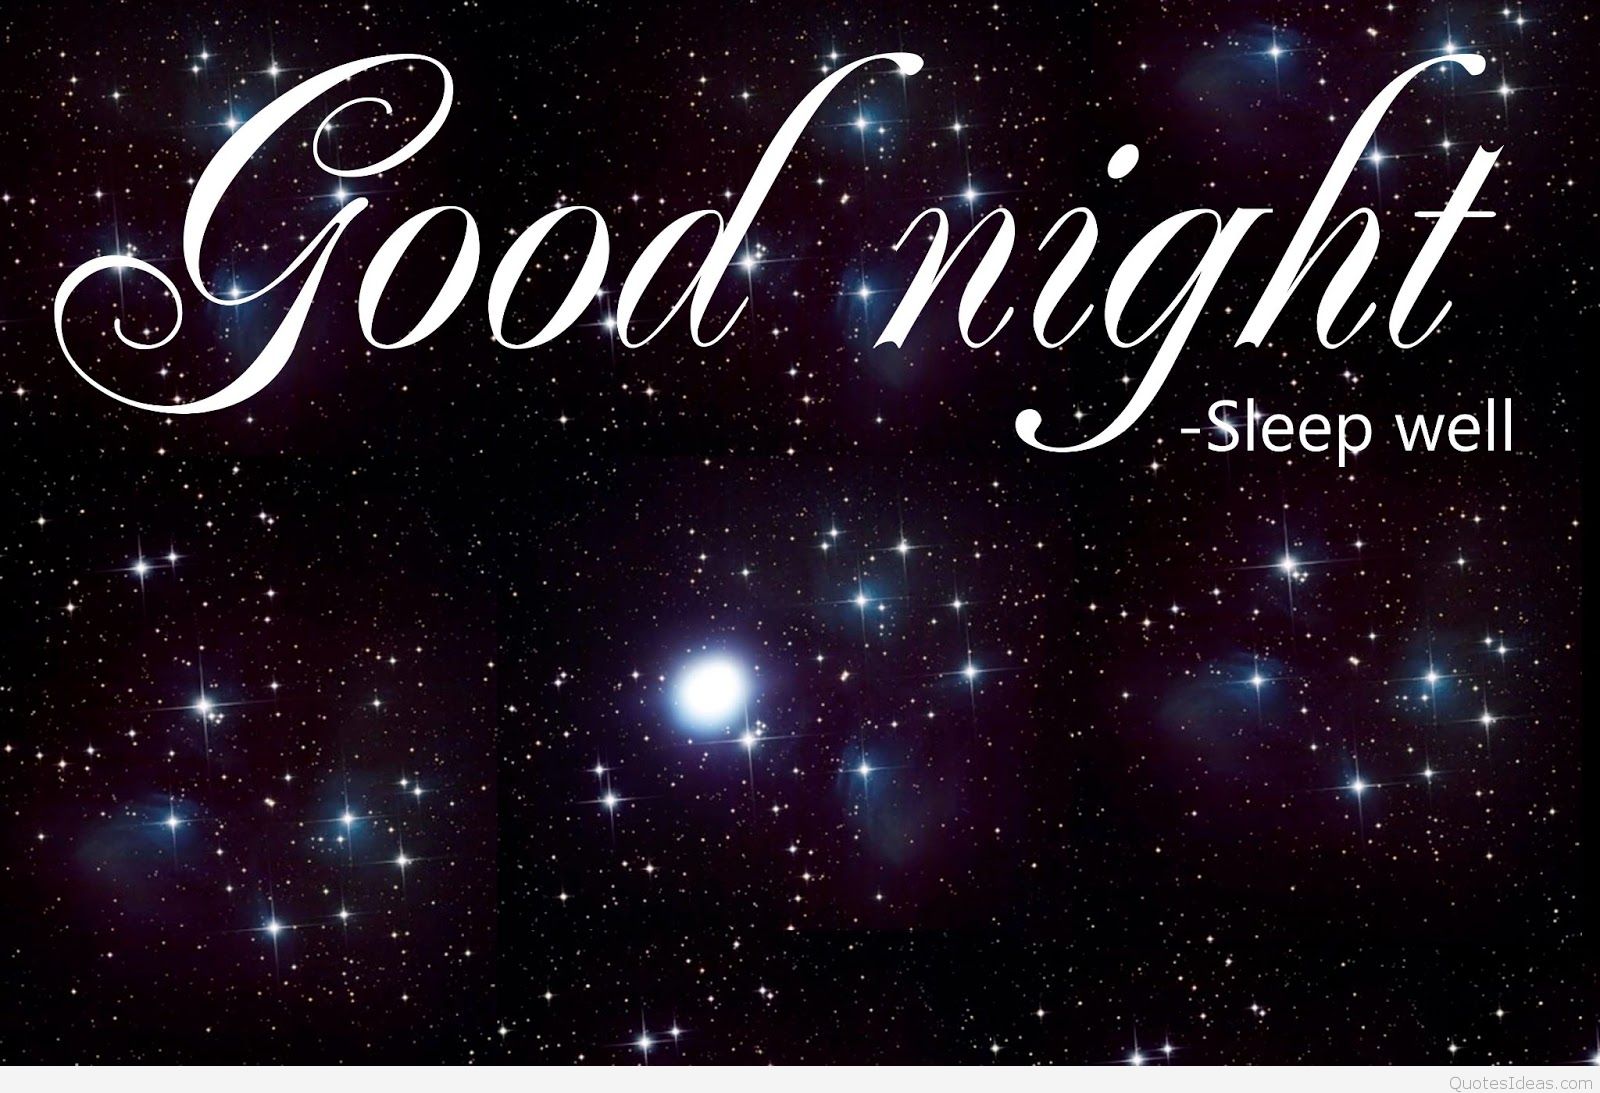 Good Night Latest For Friend Wishes Hd Wallpaper - Good Night Pick New - HD Wallpaper 